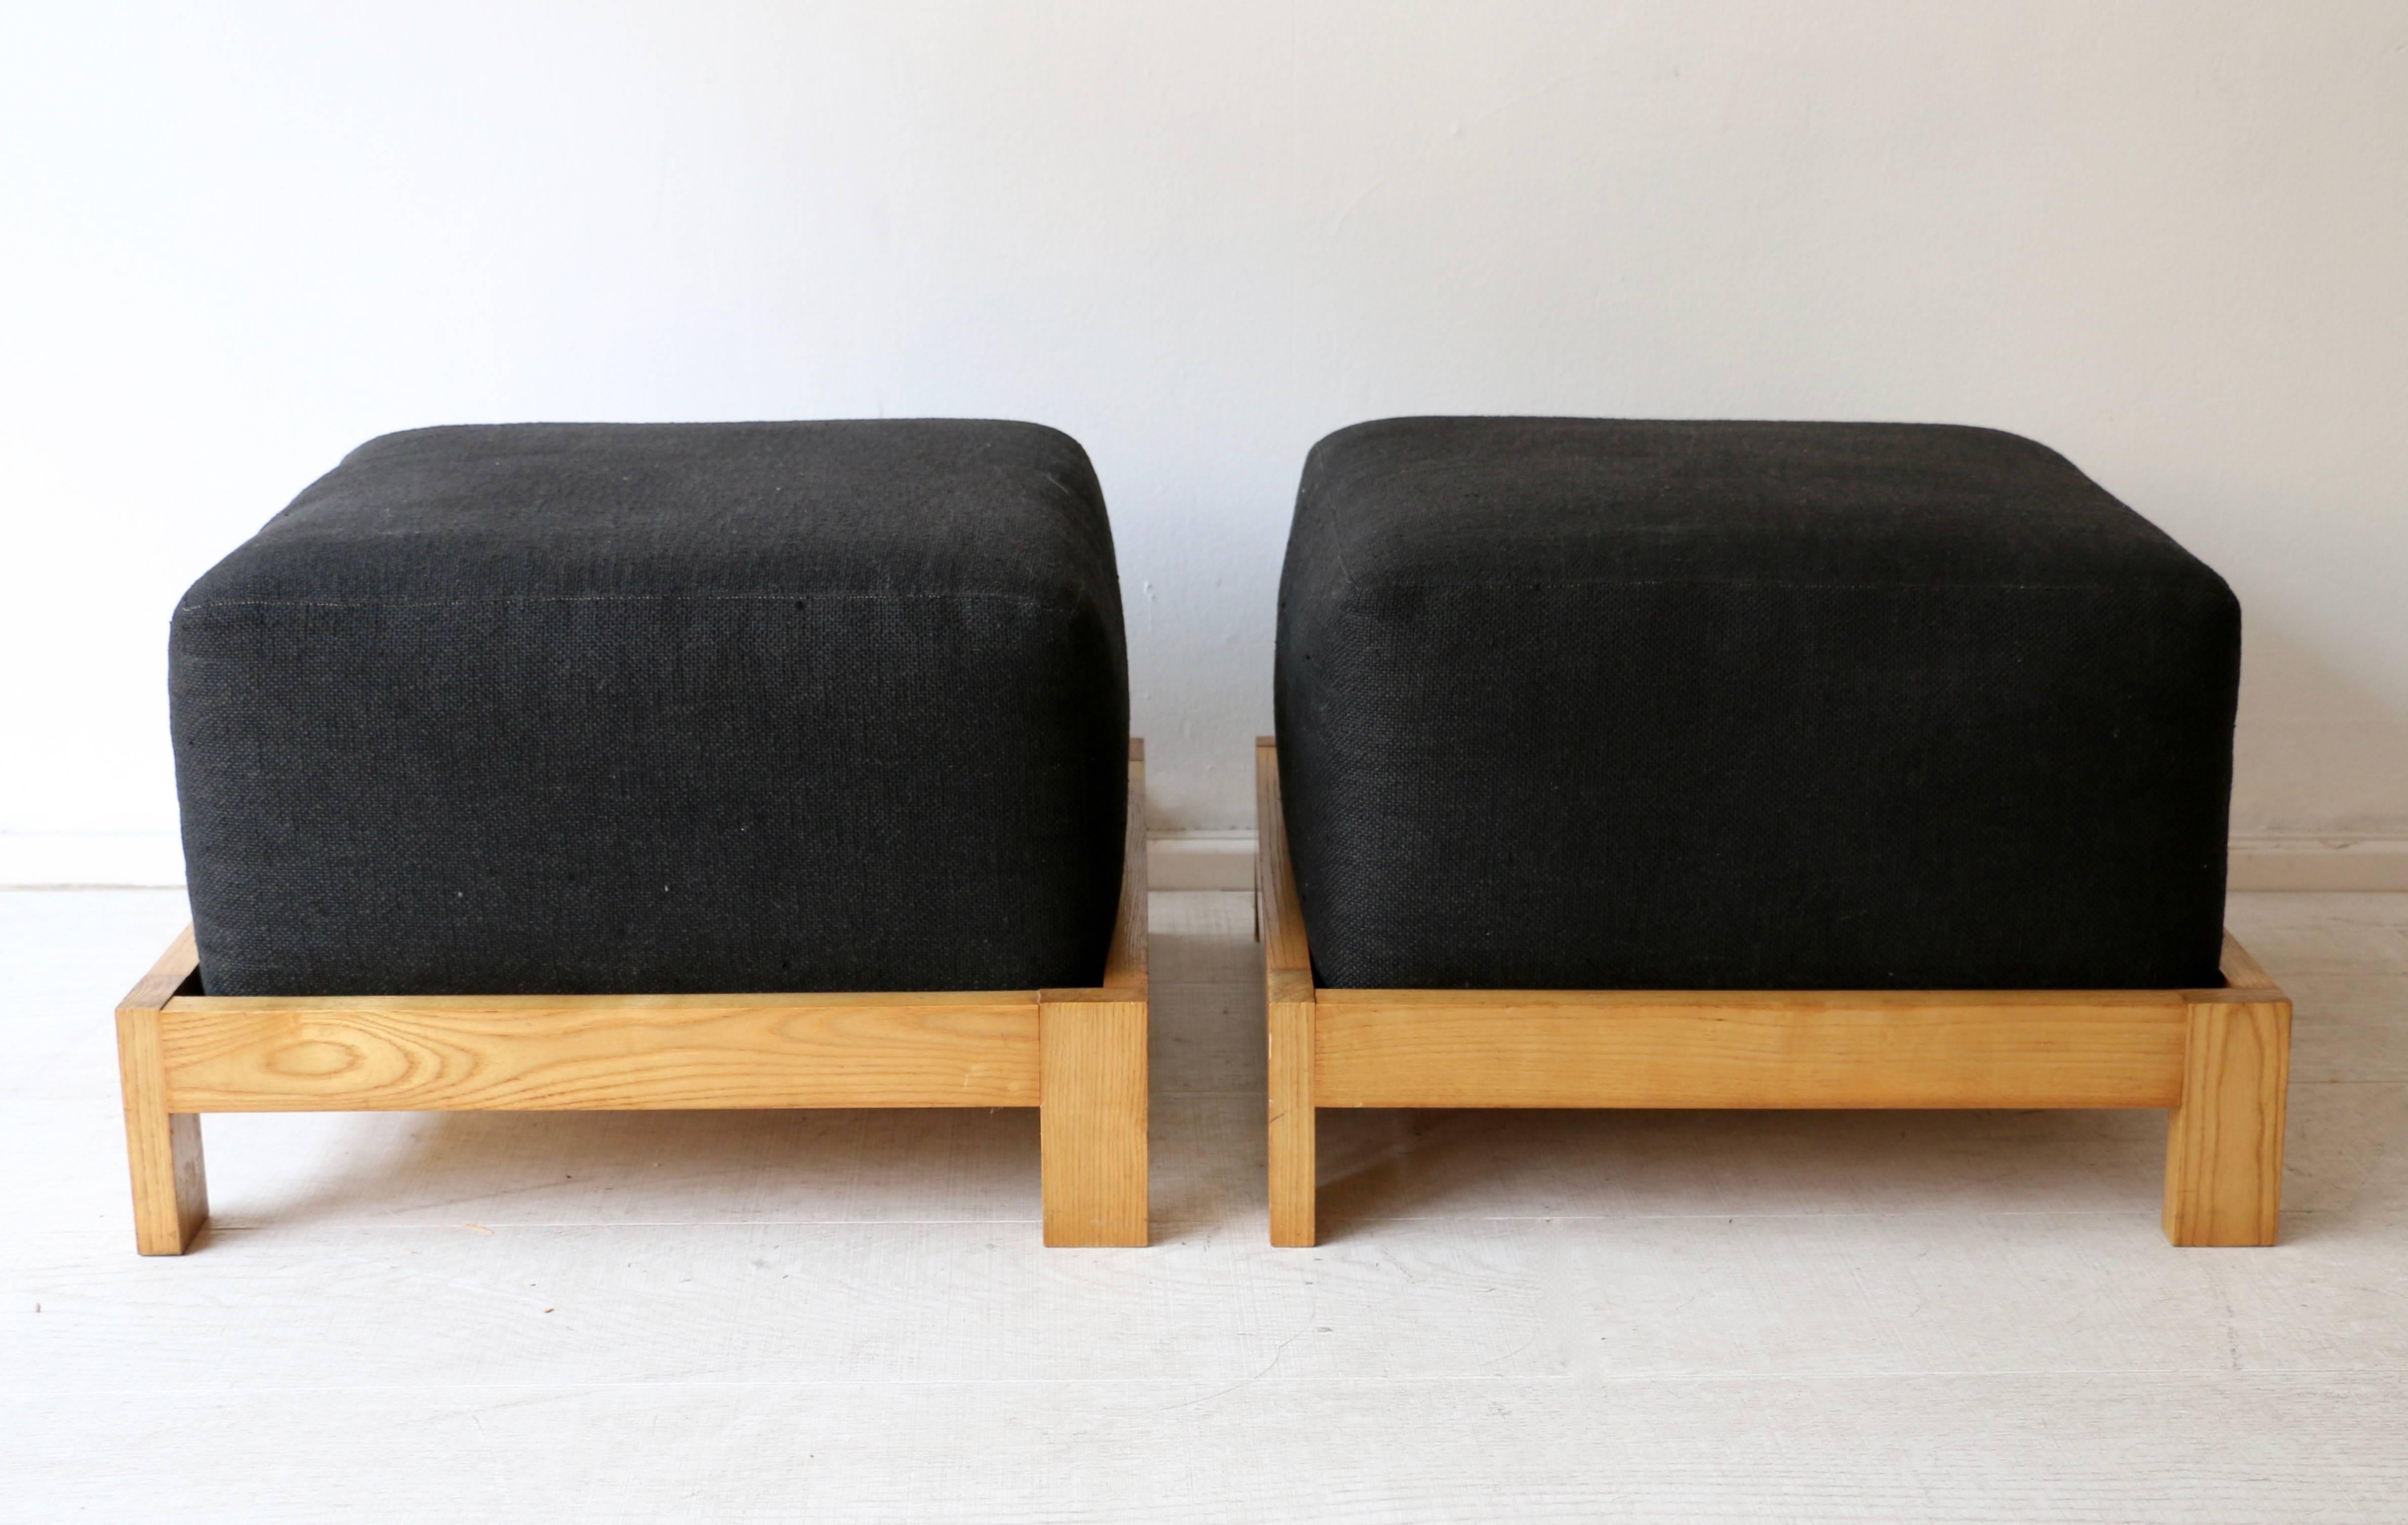 Gustave Gautier (1911-1980).
Unique piece designed in 1961 for a villa in Cannes, France. 
Pair of bright wood stools and fabric ottomans.